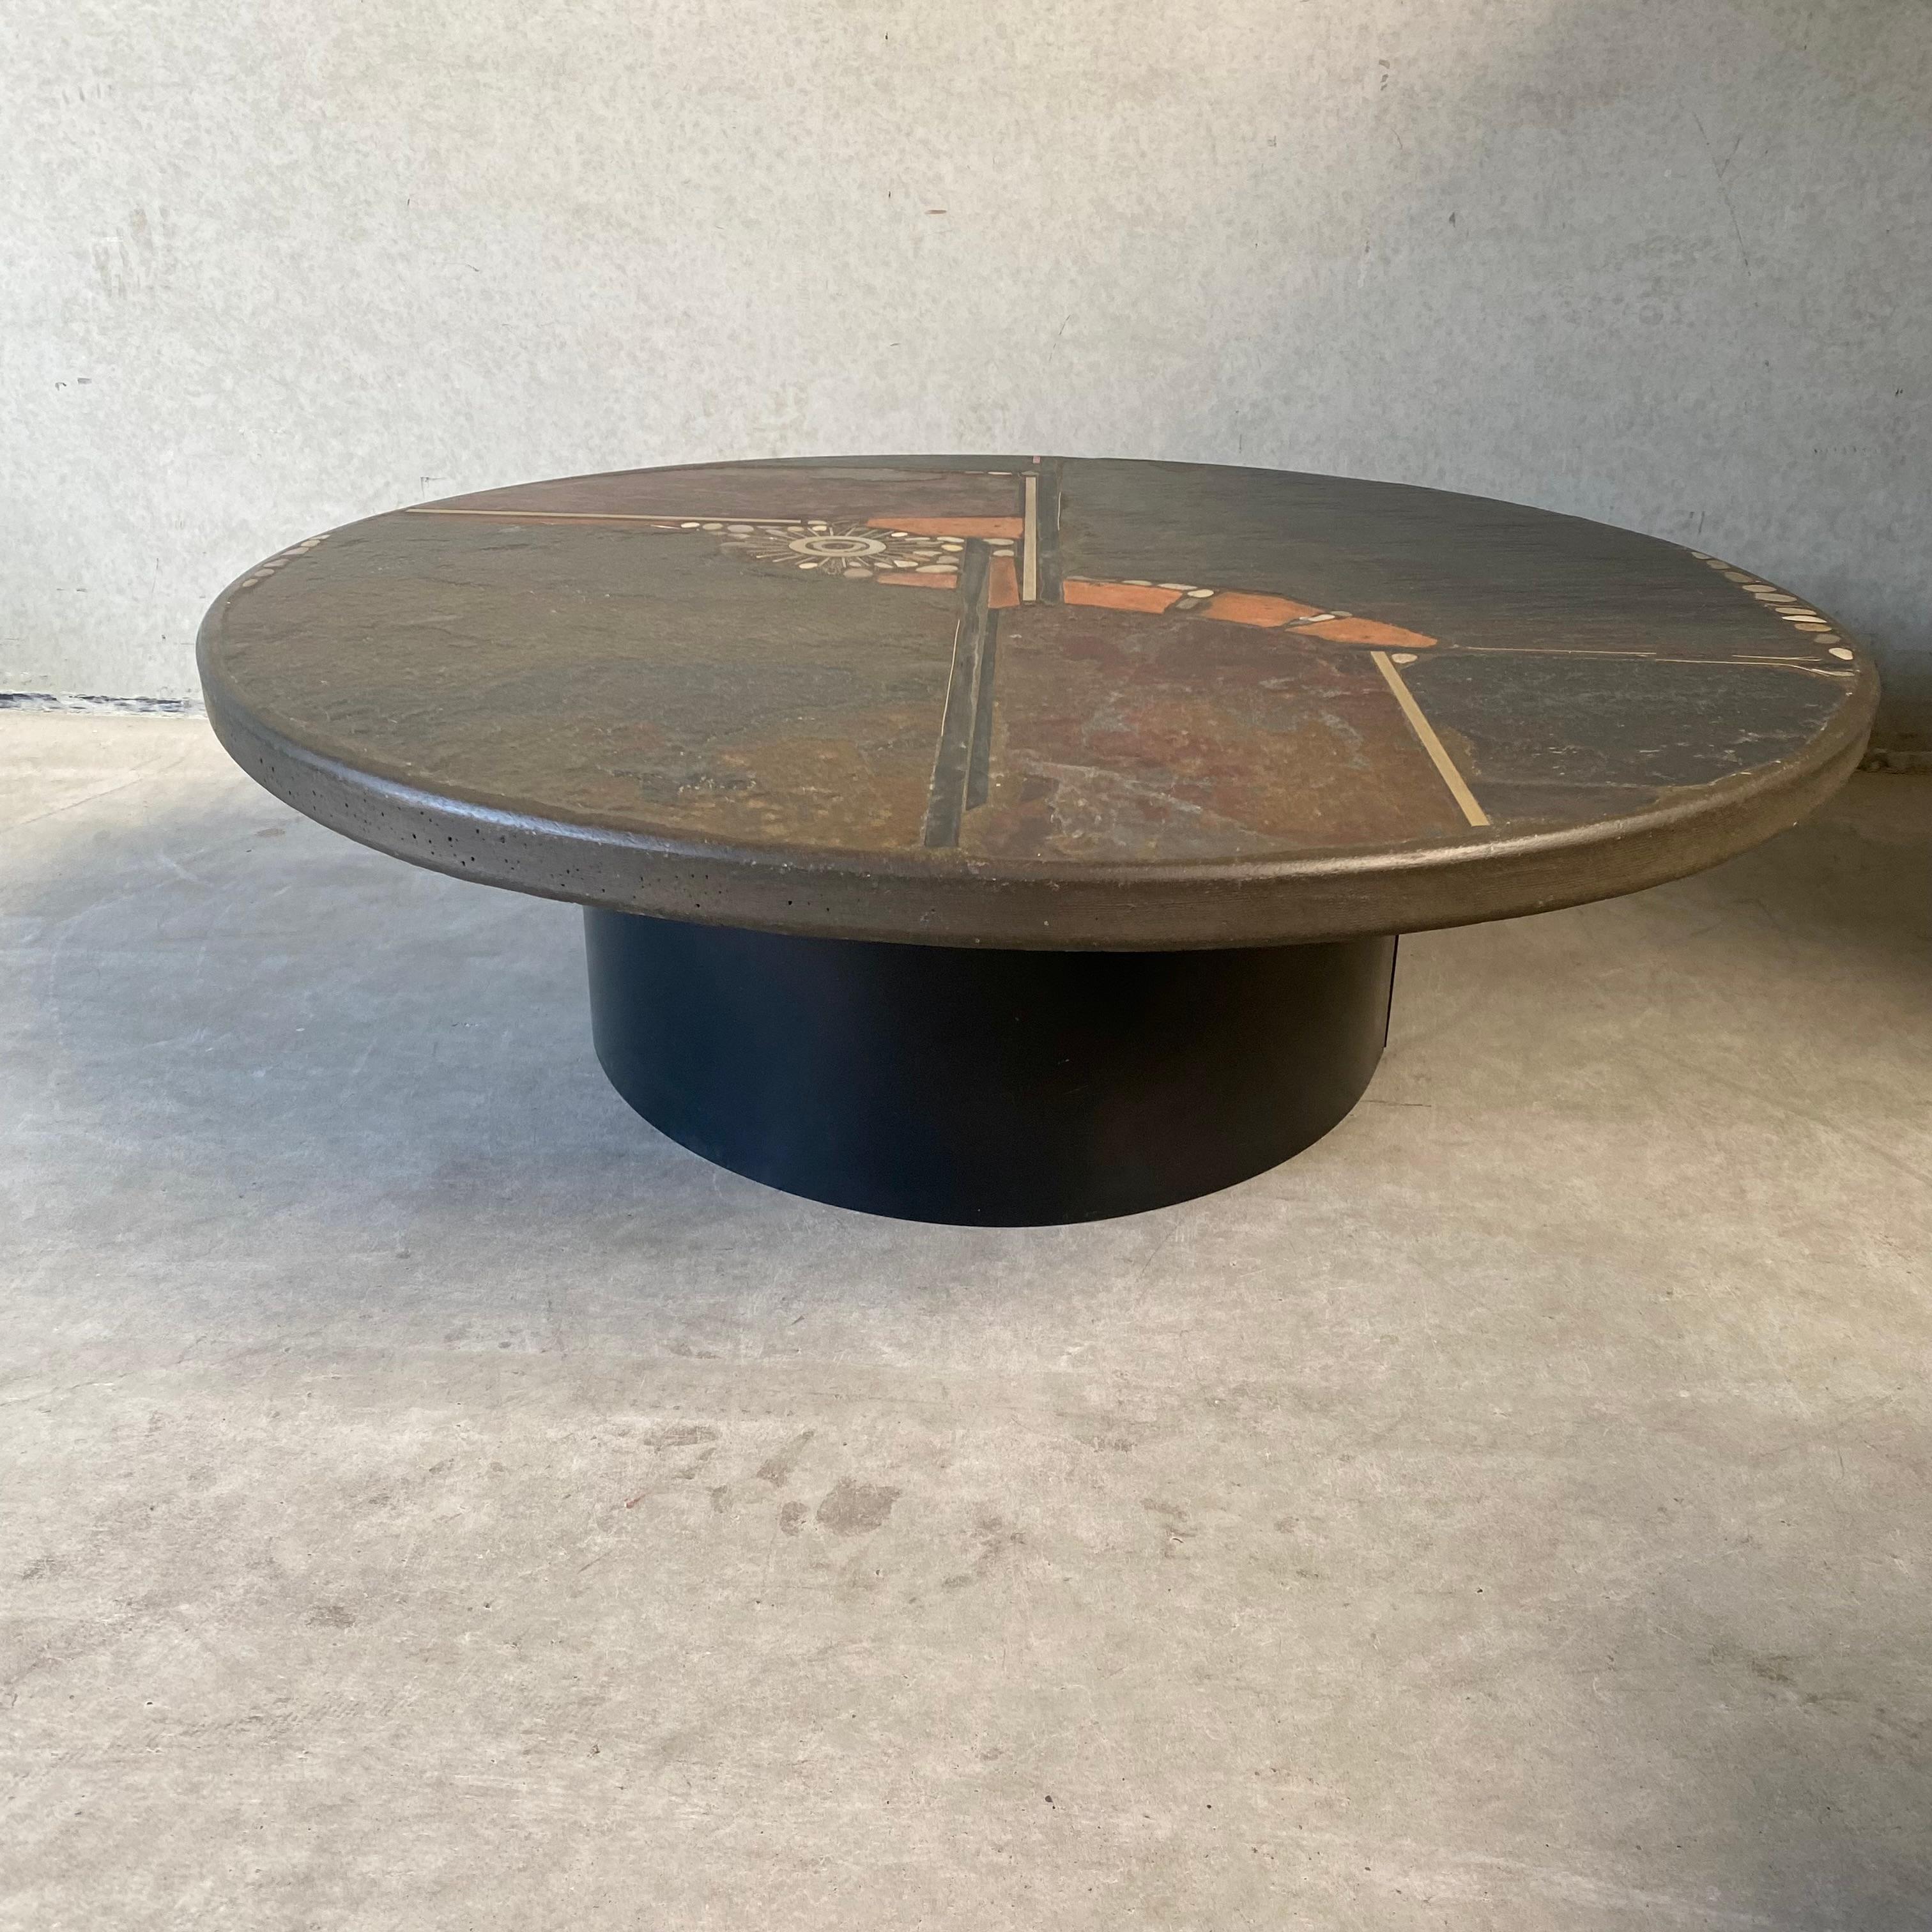 Late 20th Century Brutalist Round Coffee Table by Sculptor Paul Kingma, Netherlands, 1985 For Sale